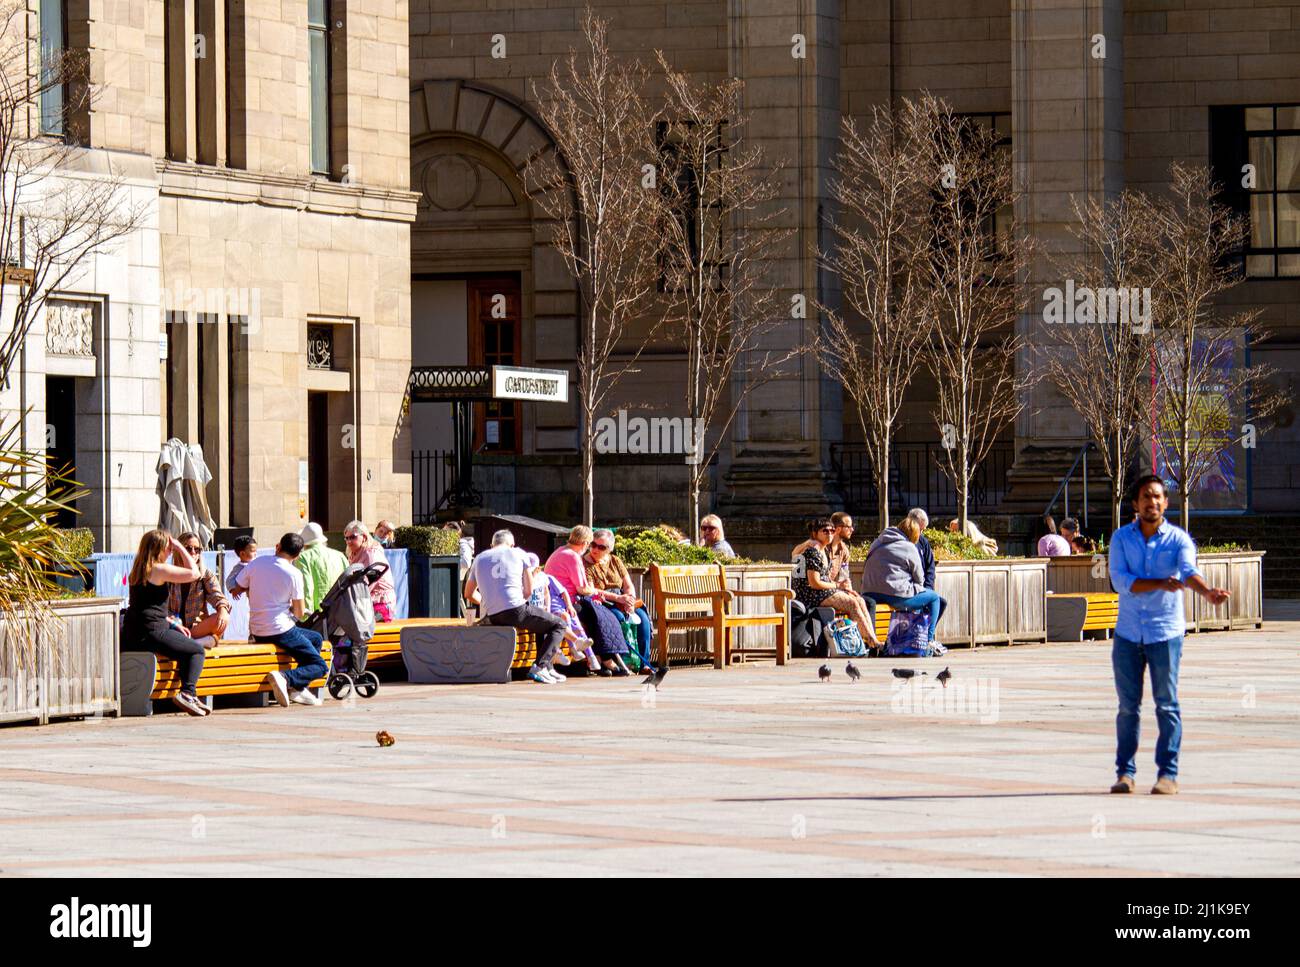 Dundee, Tayside, Scotland, UK. 26th Mar, 2022.Temperatures in parts of North East Scotland reached 18°C as a result of the warm March sunshine. Dundee residents are out and about in the city centre, taking advantage of the glorious warm Spring weekend weather and having a good time while socialising. Credit: Dundee Photographics/Alamy Live News Stock Photo